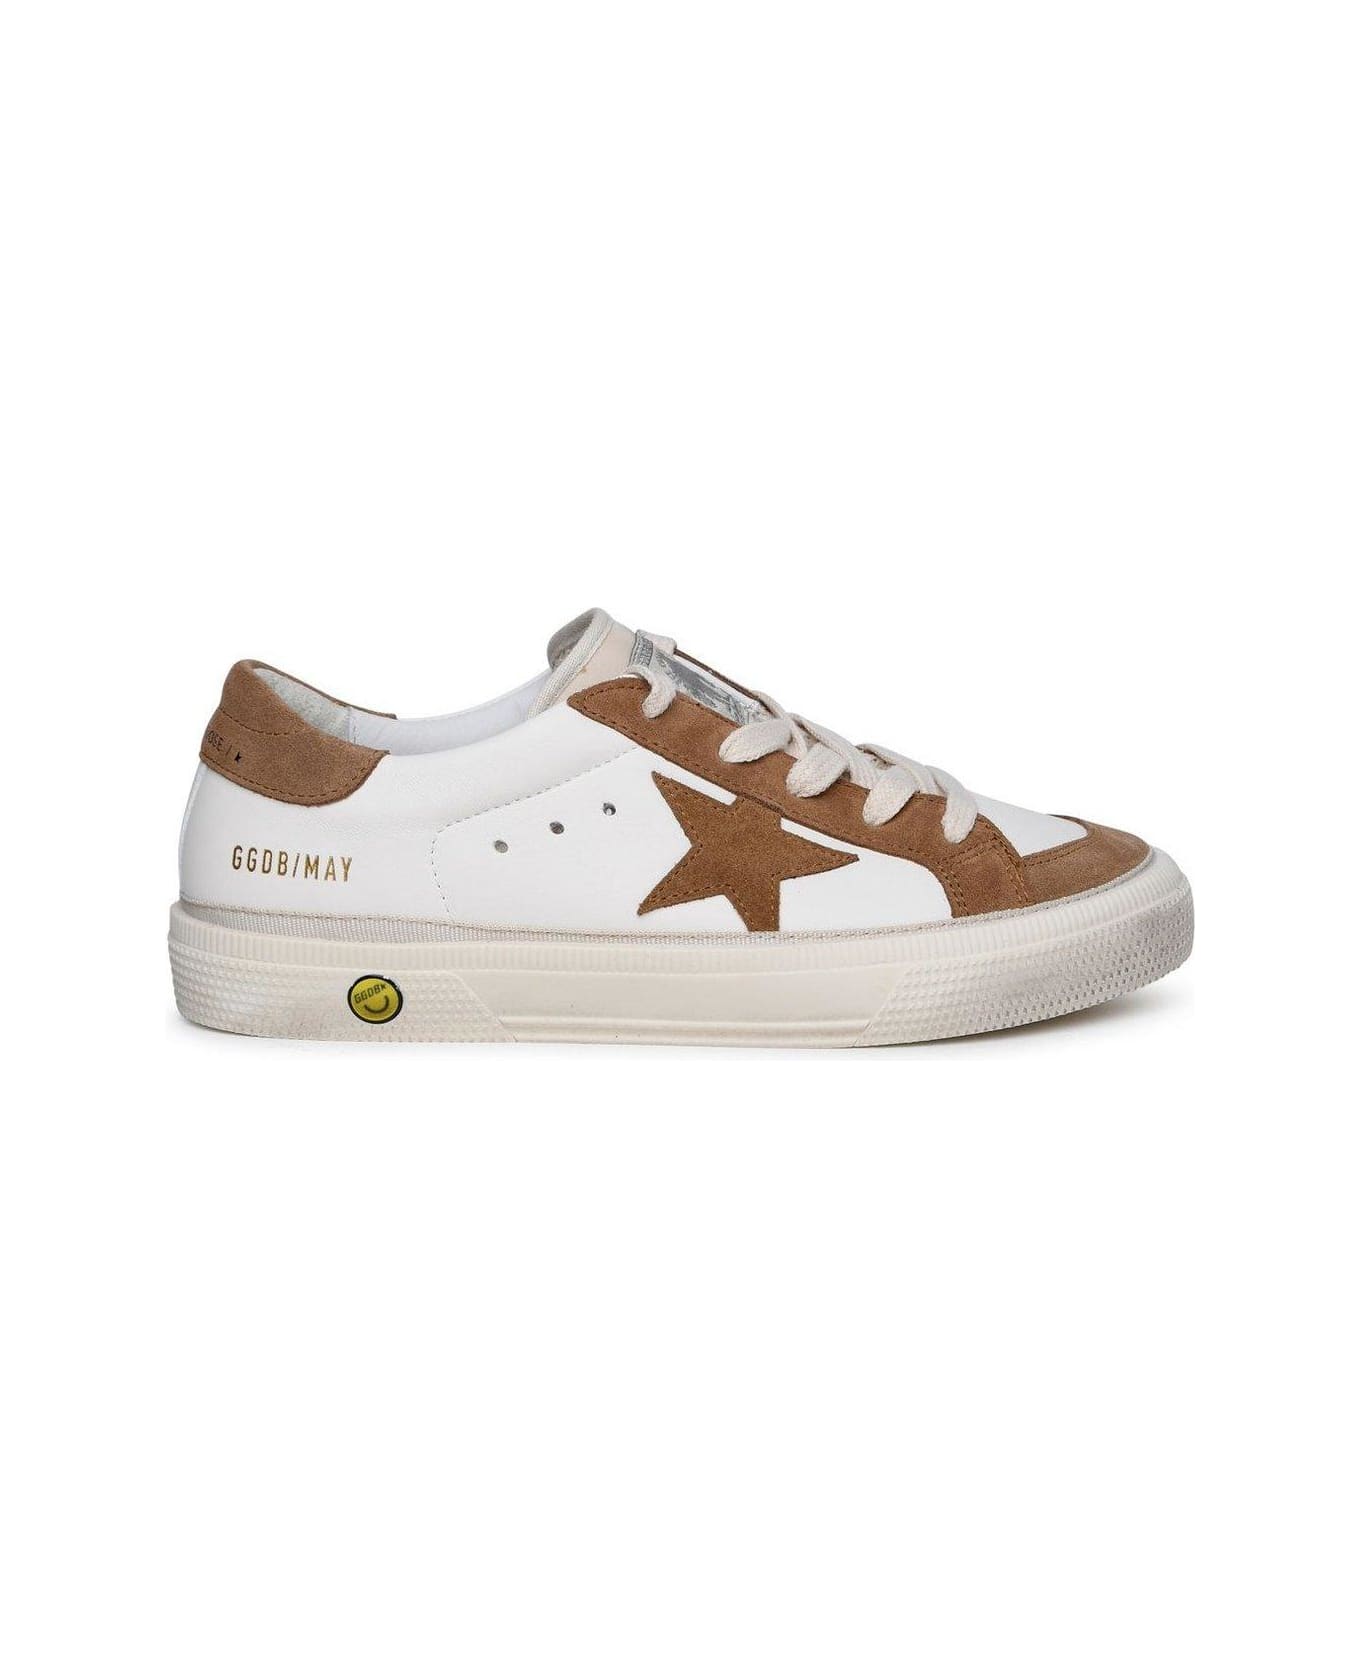 Golden Goose Superstar Lace-up Sneakers - White/Light Brown シューズ